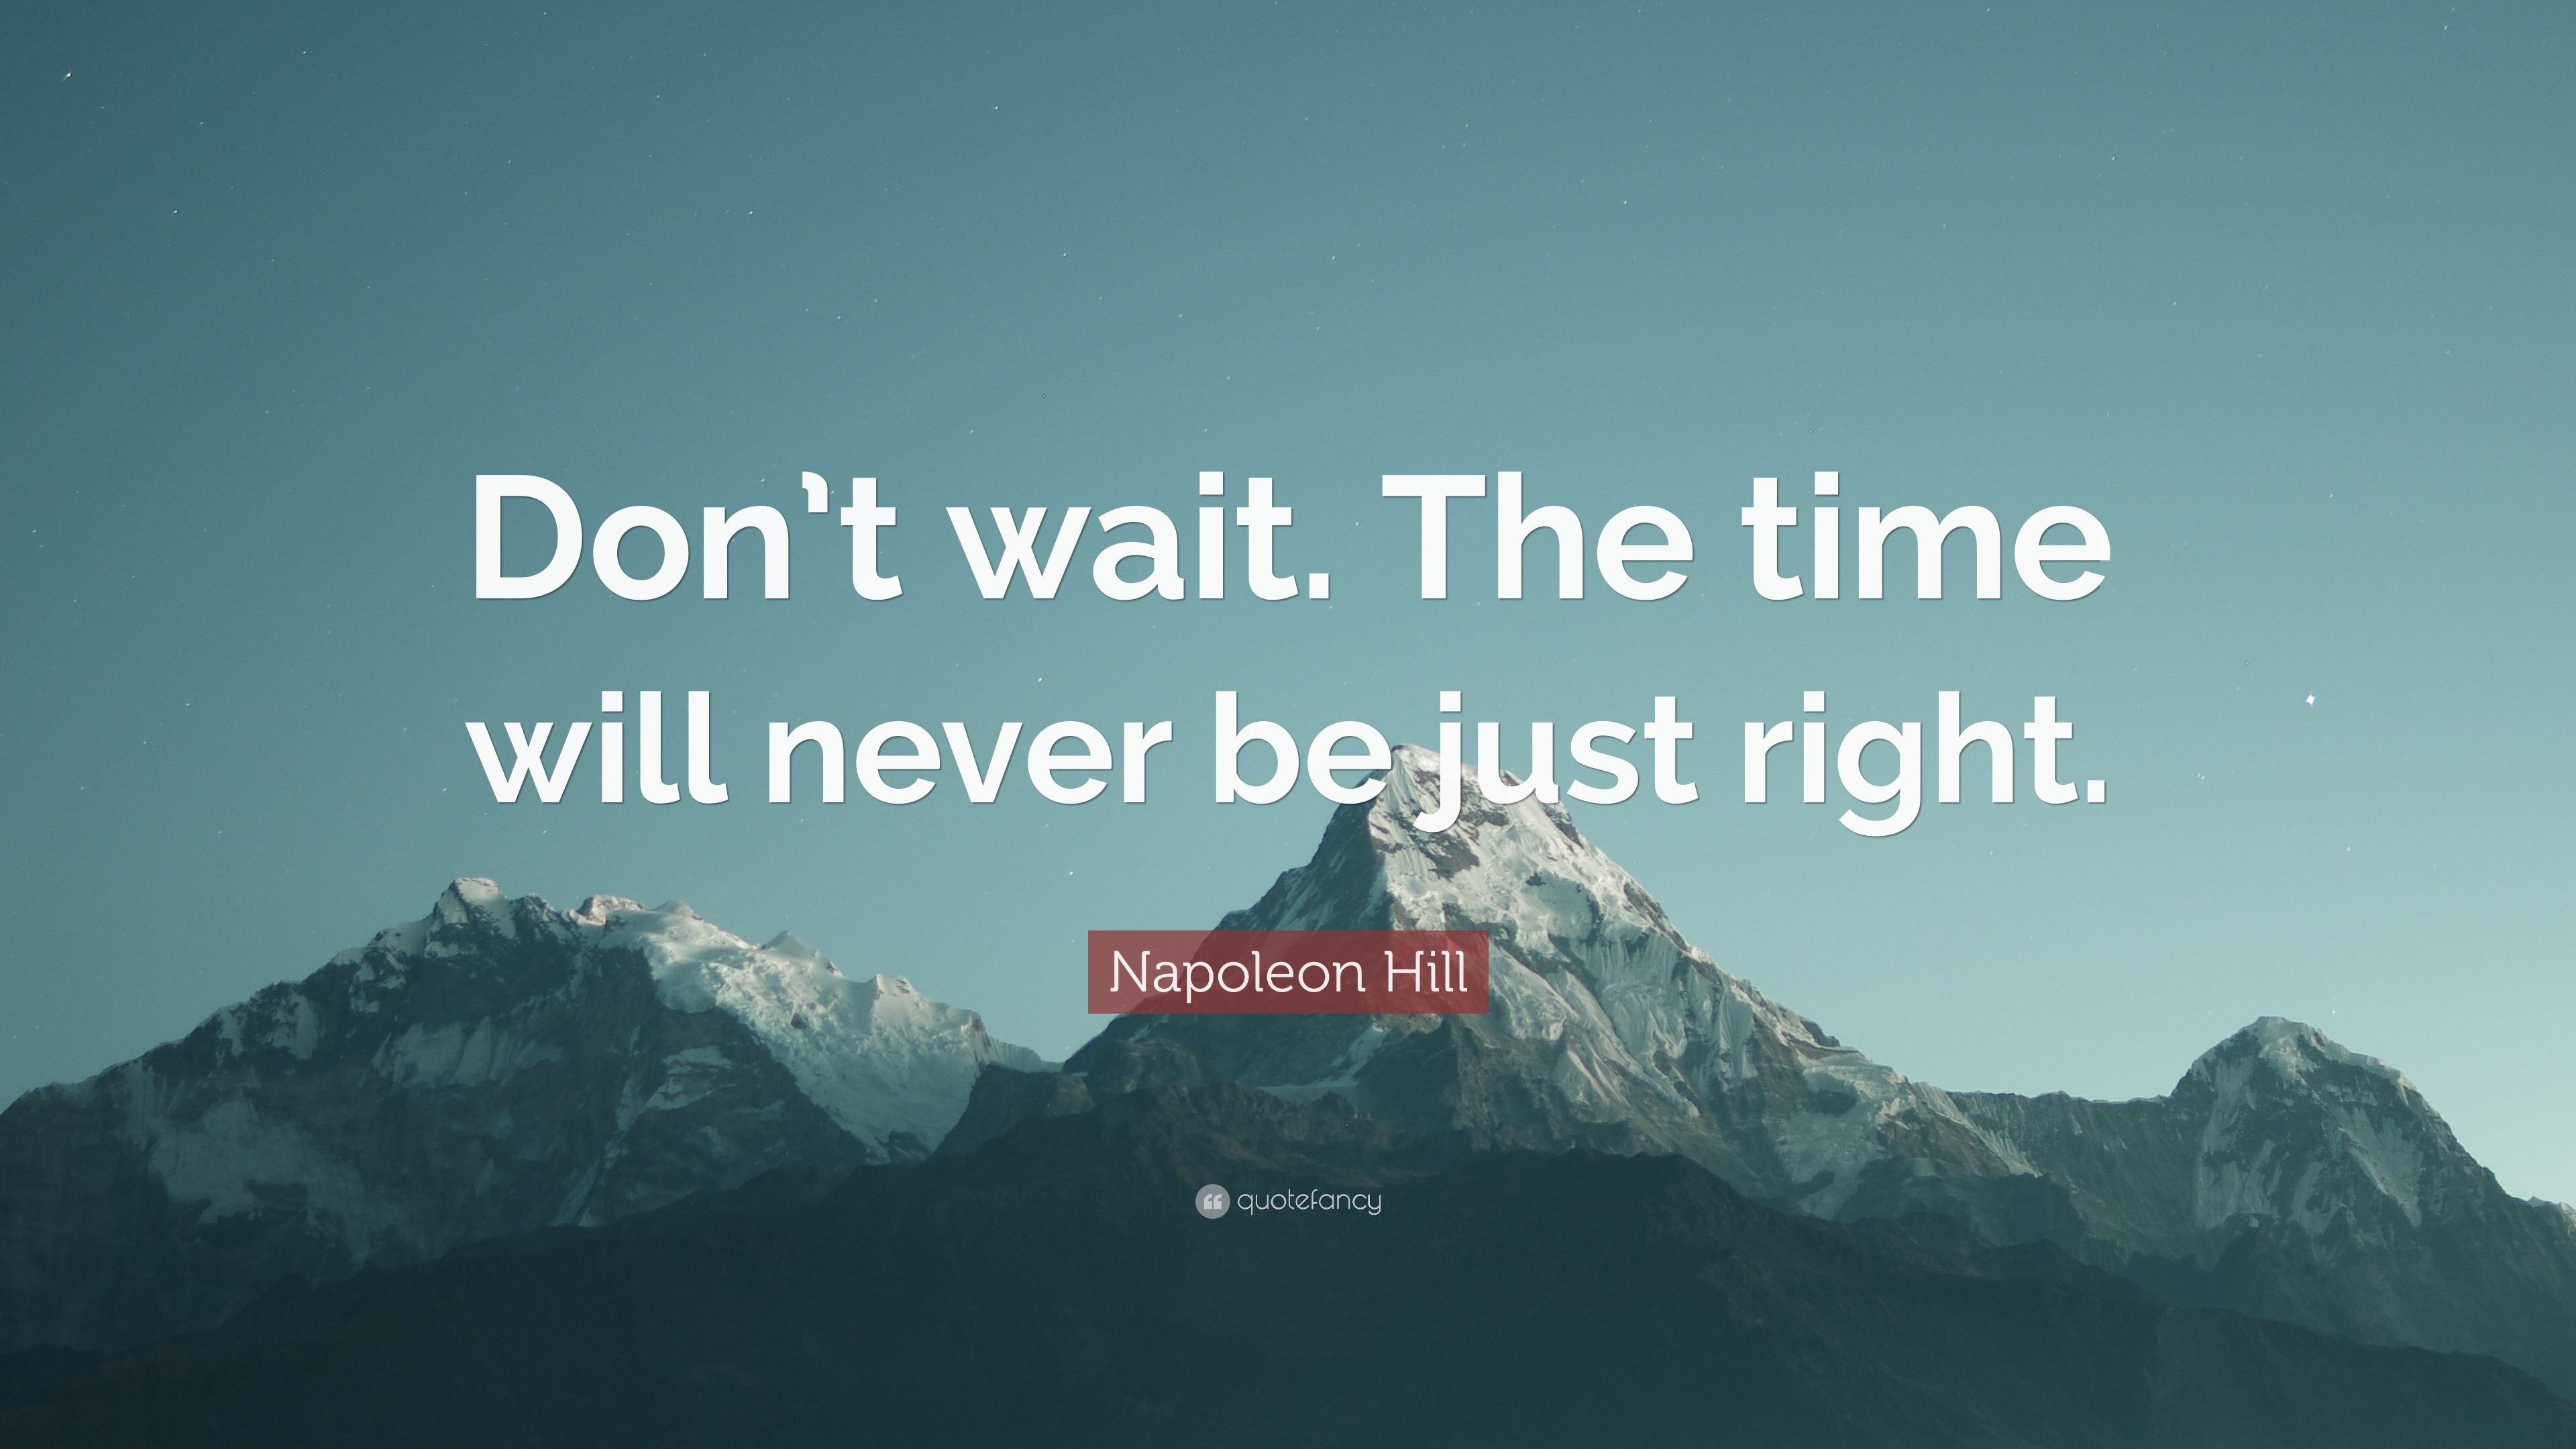 Napoleon Hill Quote: “Don’t wait. The time will never be just right.”